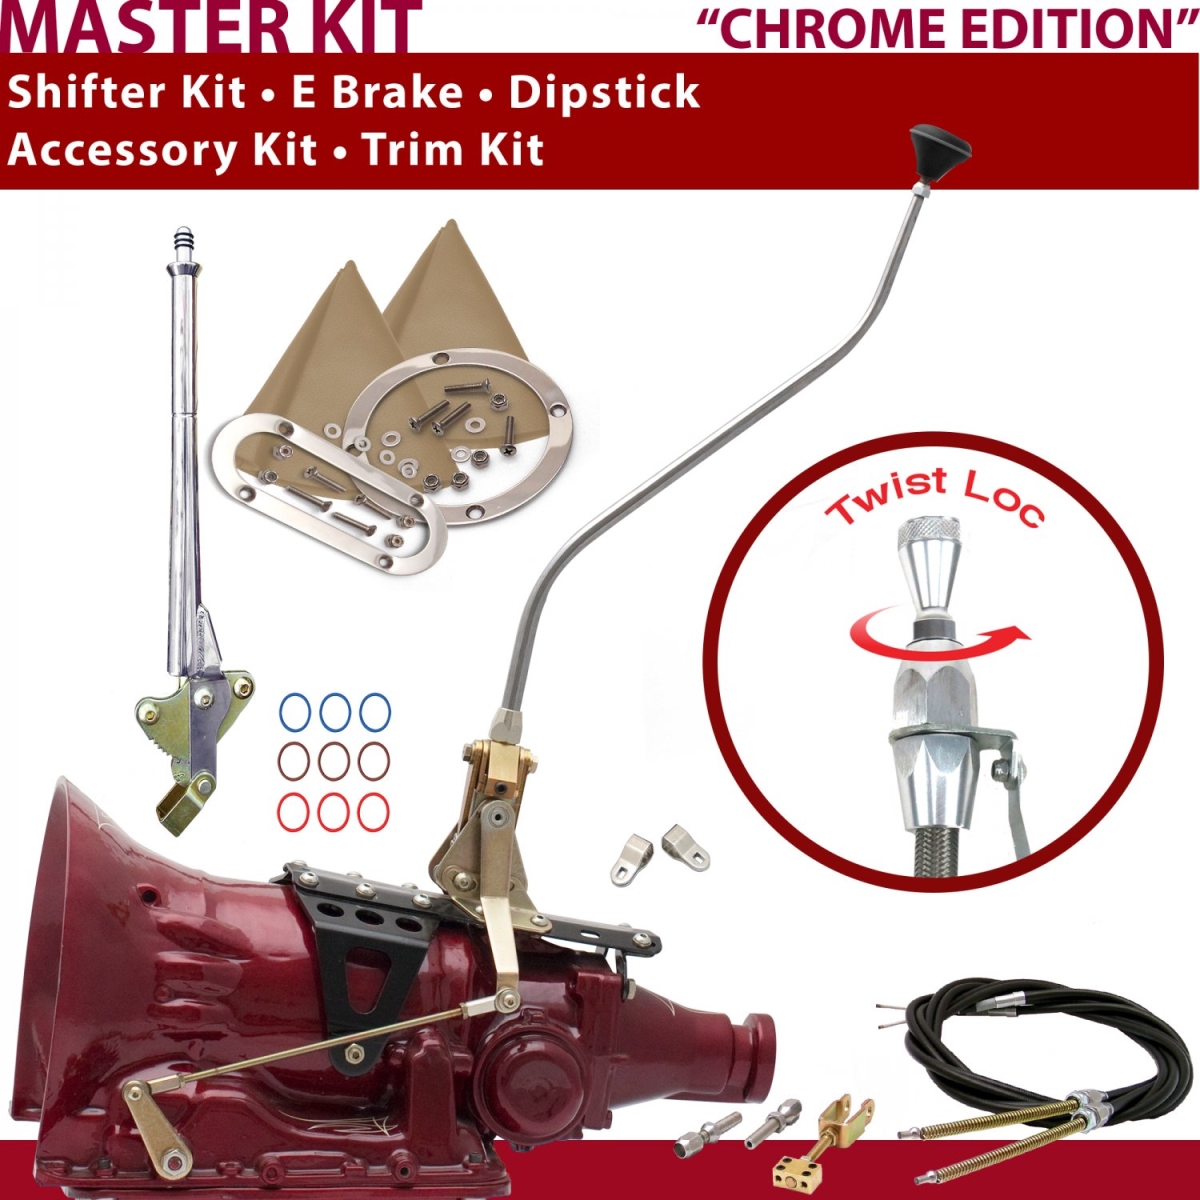 American Shifter 432372 C4 Shifter Kit Chrome 23 in. Swan E Brake Cable Clevis Trim Kit Dipstick for DDCE0 -  American Shifter Company